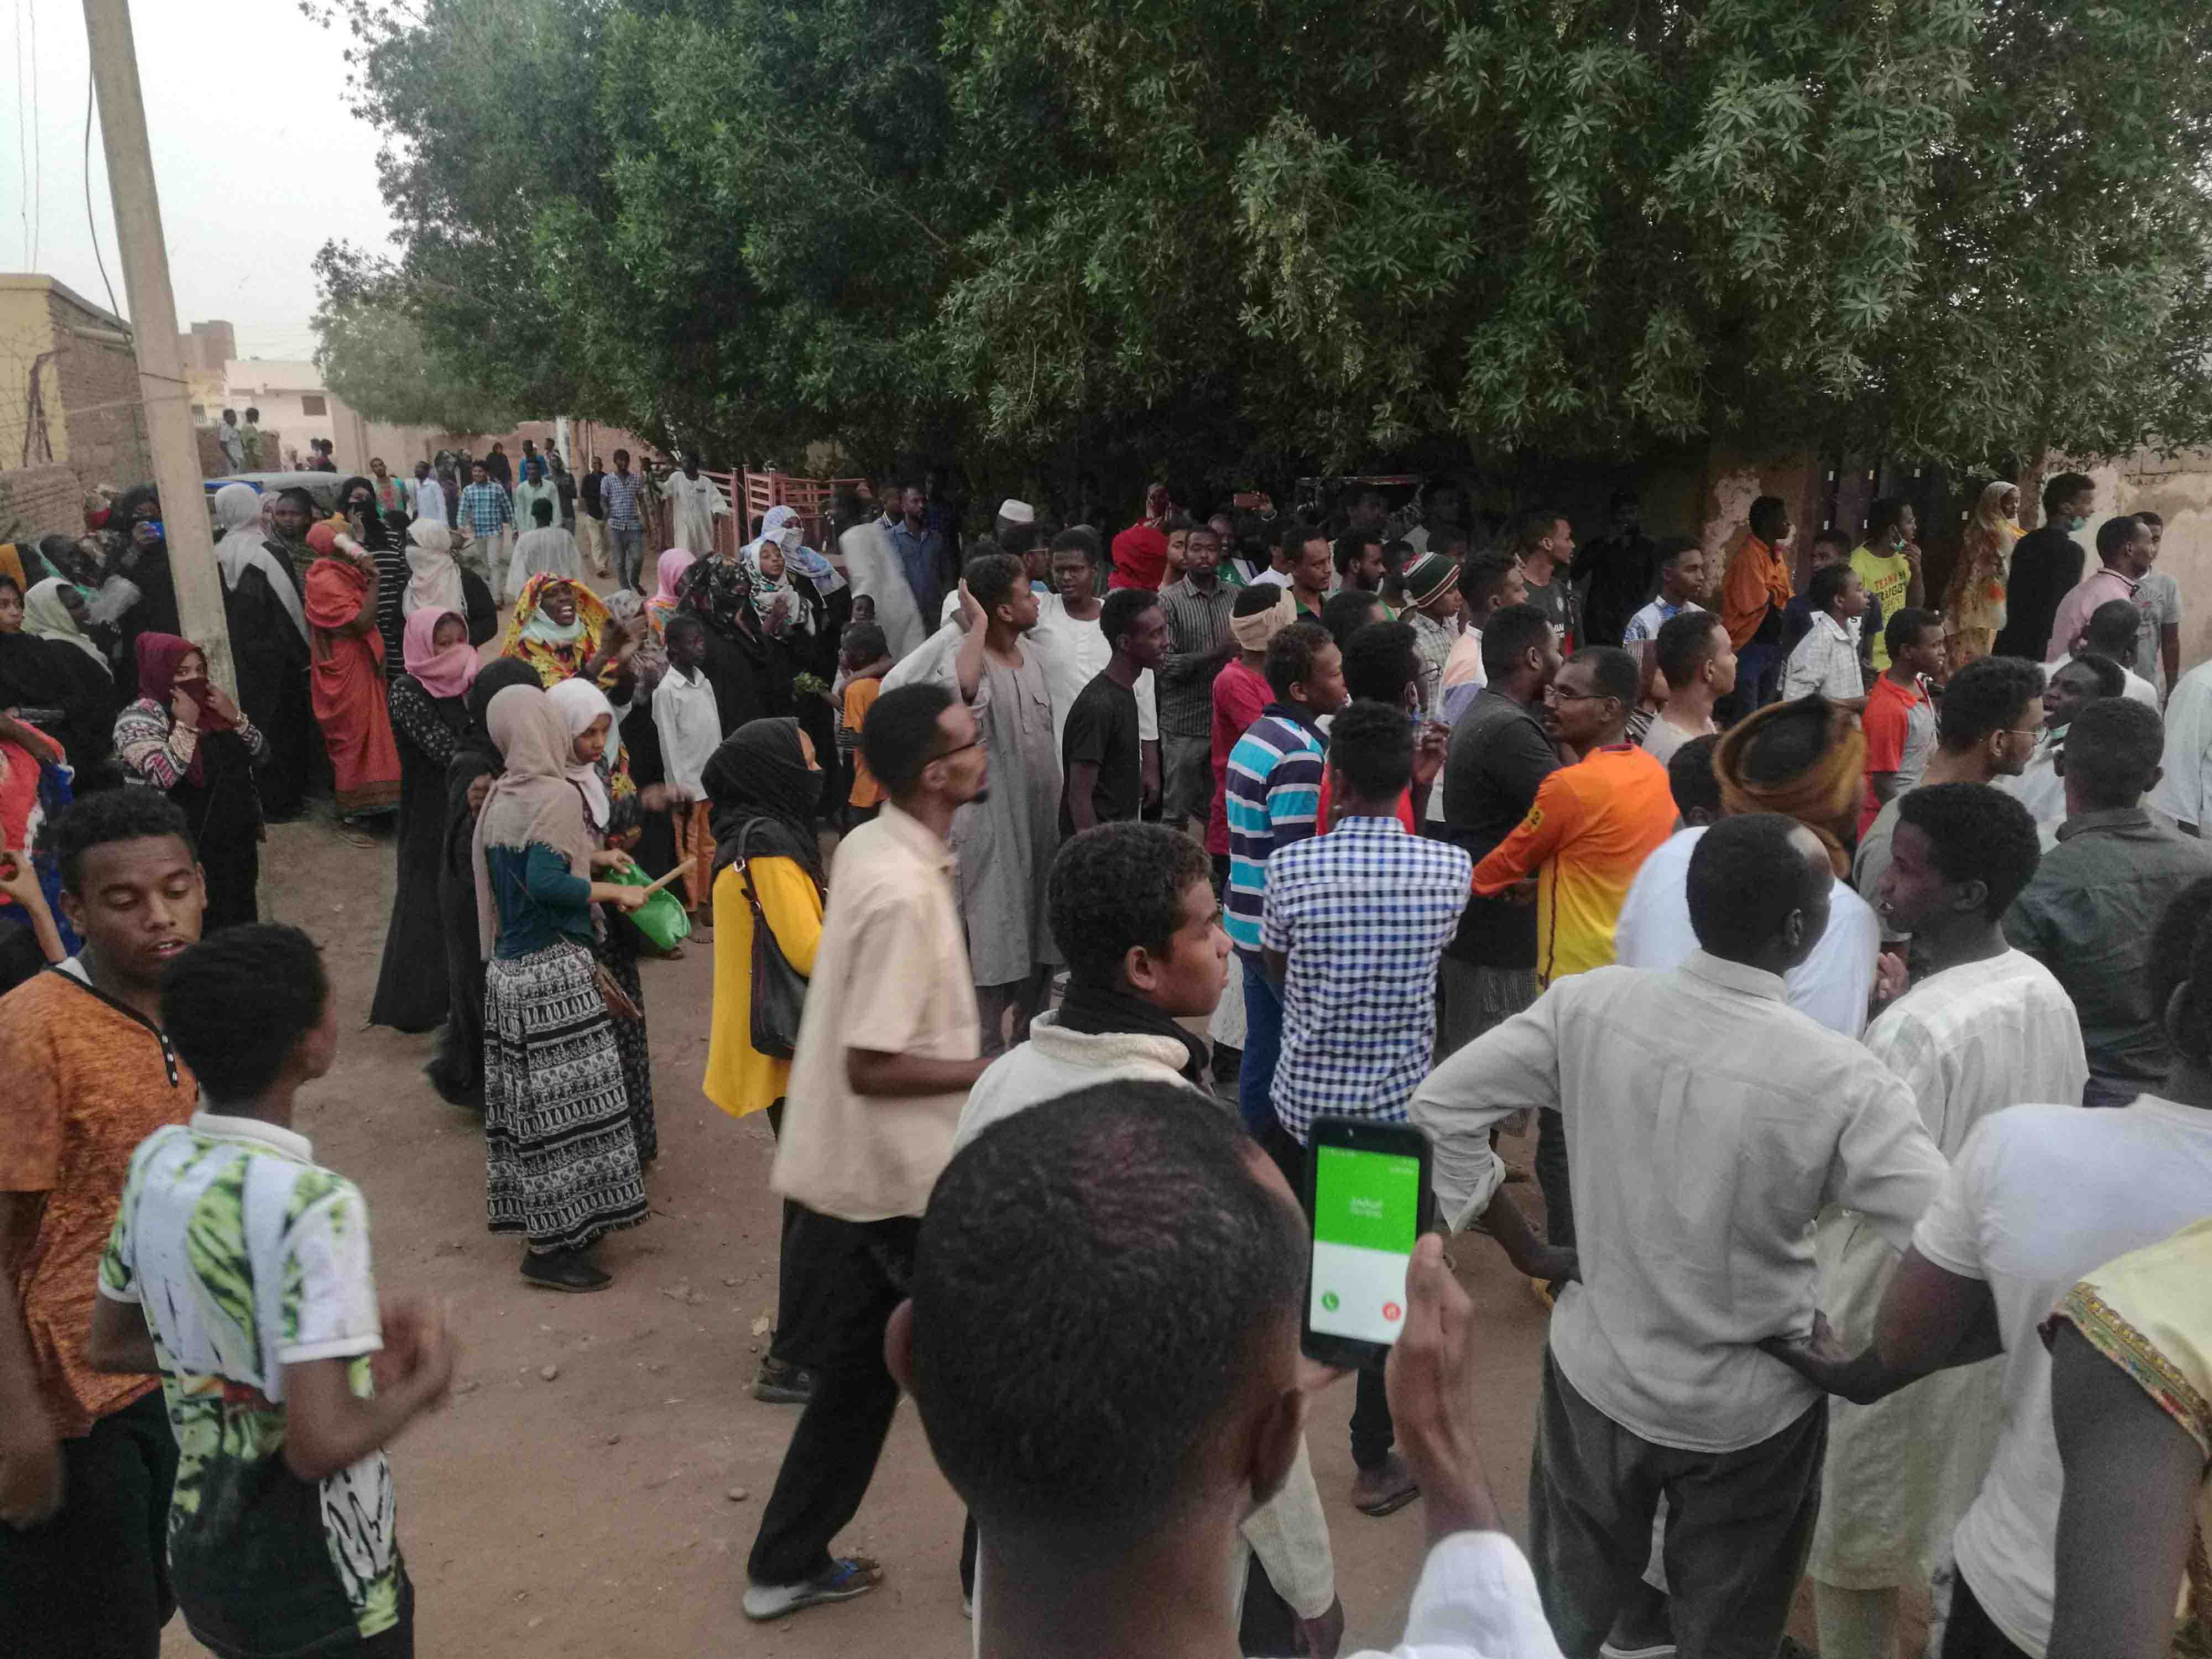 The Sudanese Professionals Association that is spearheading the protest campaign had called on demonstrators to march on the palace